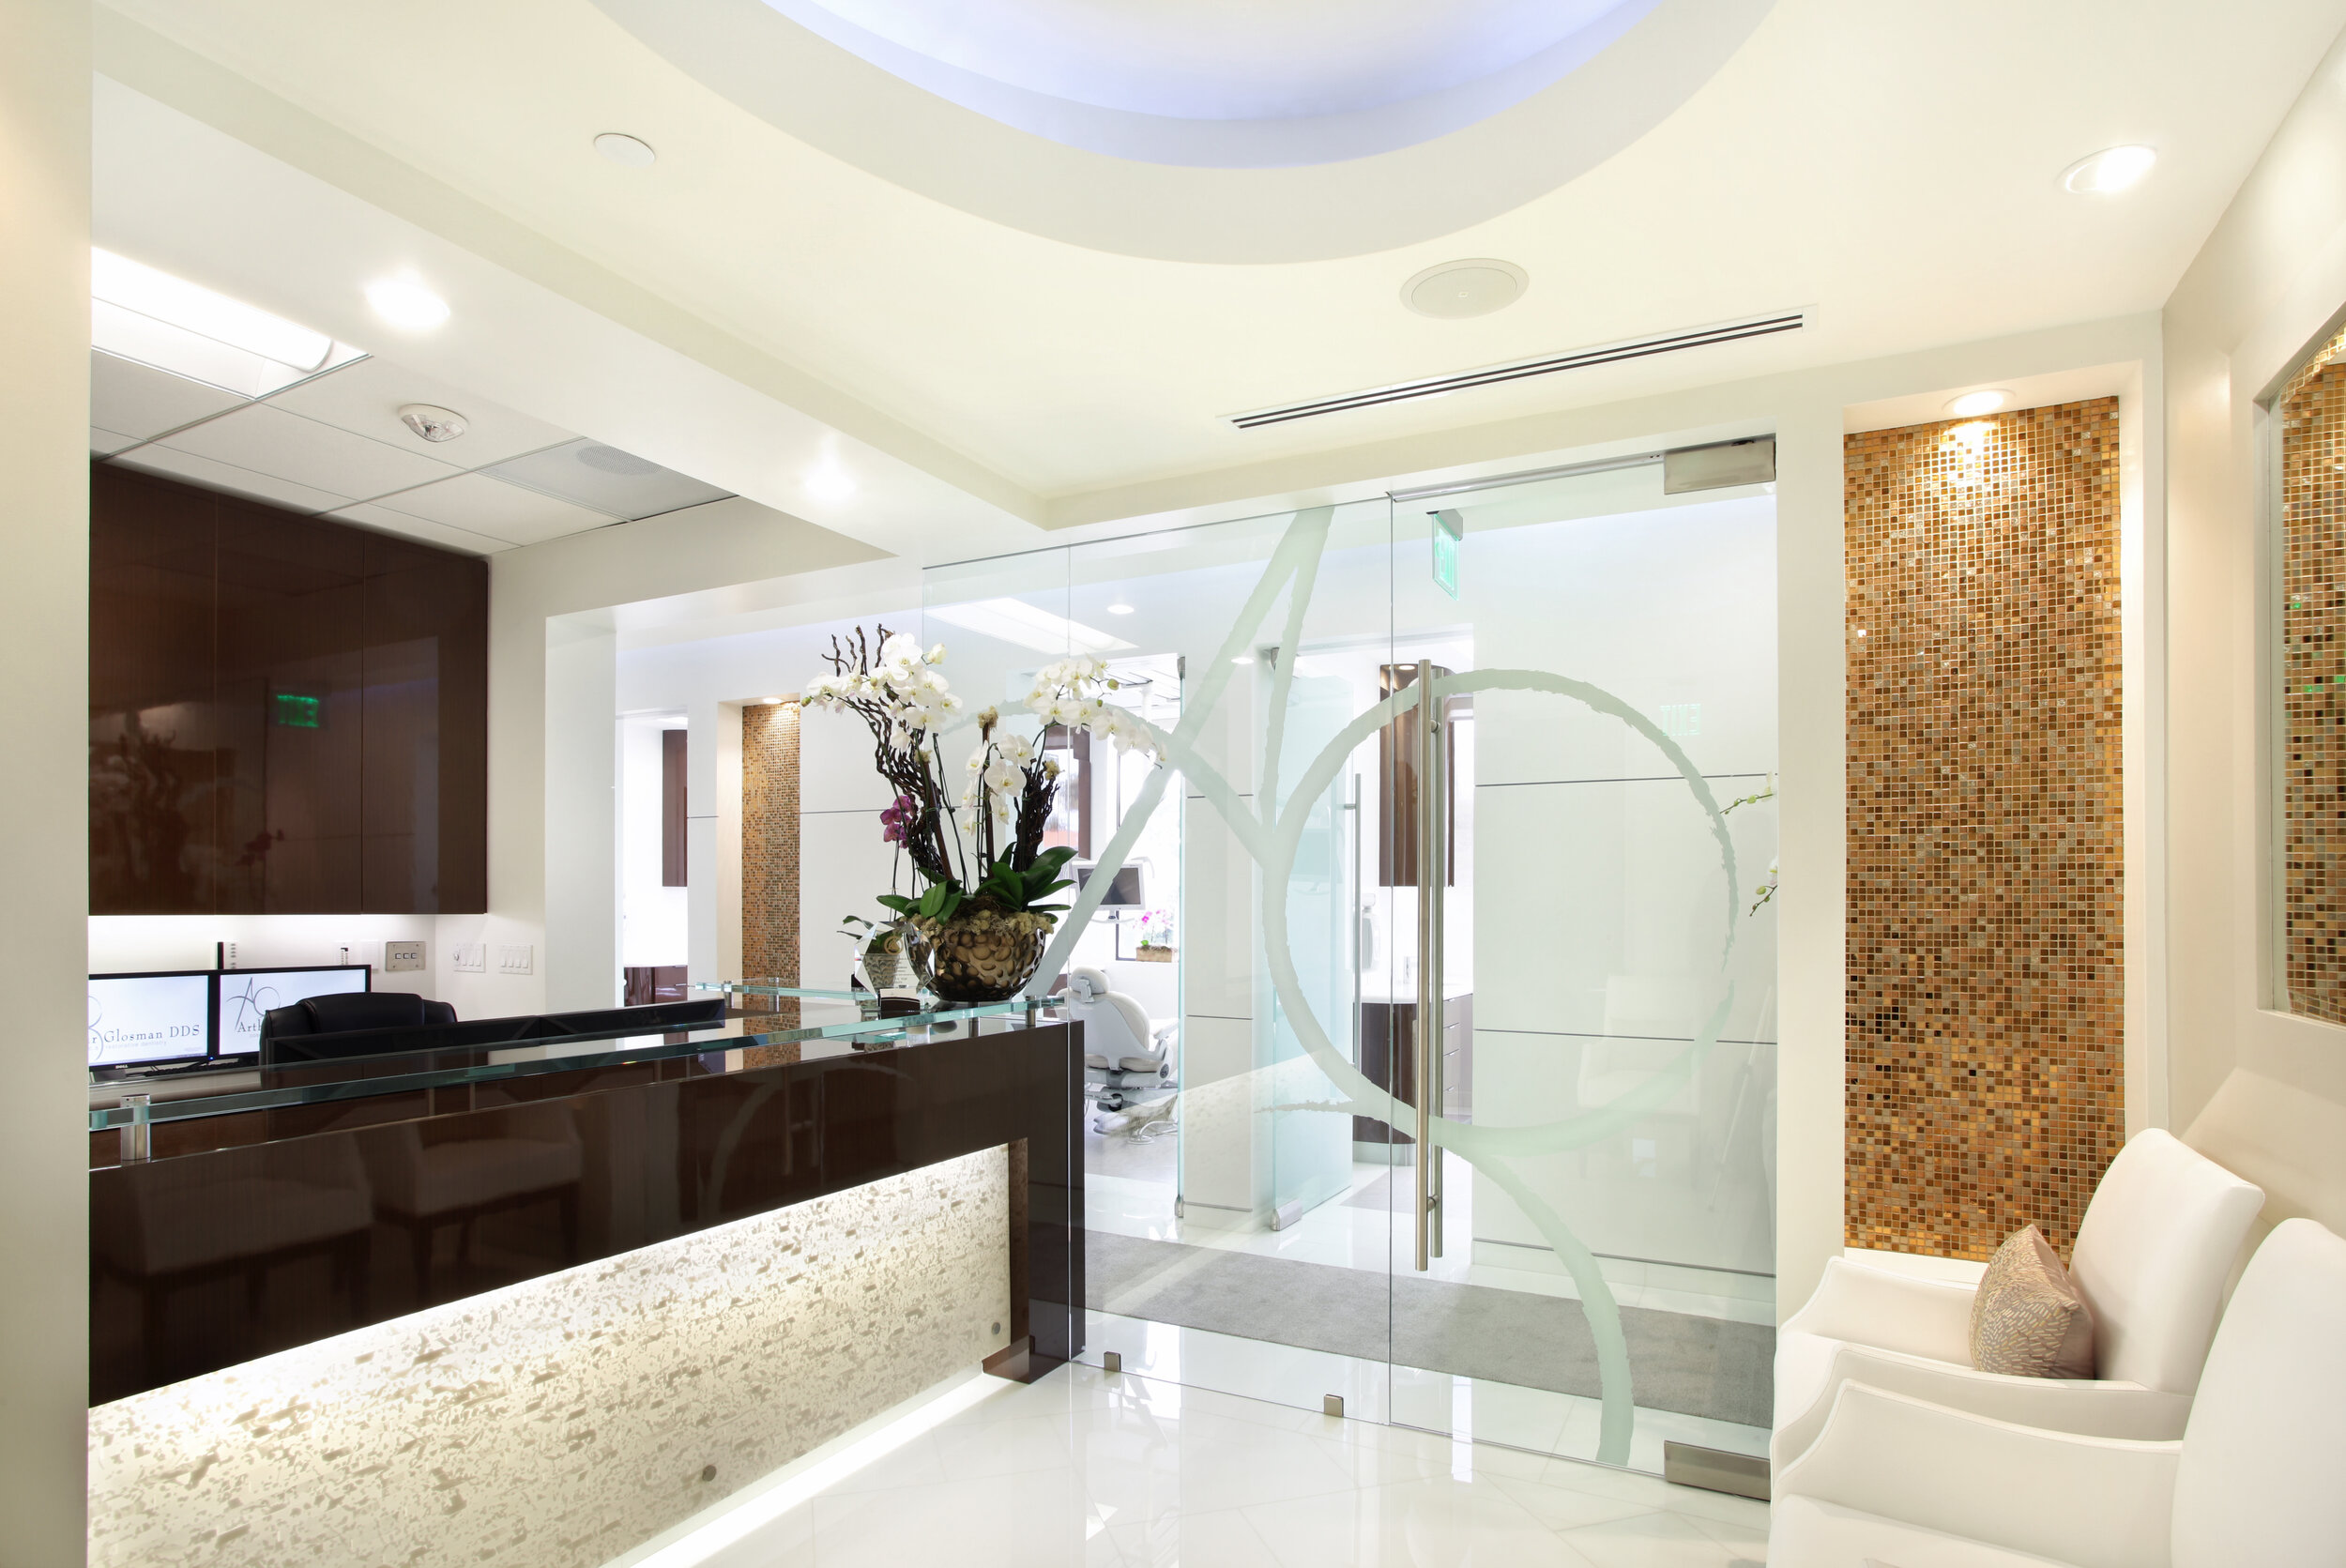 Dr. Glosman’s cosmetic dentistry office more closely resembles a luxurious spa than a traditional dental clinic.